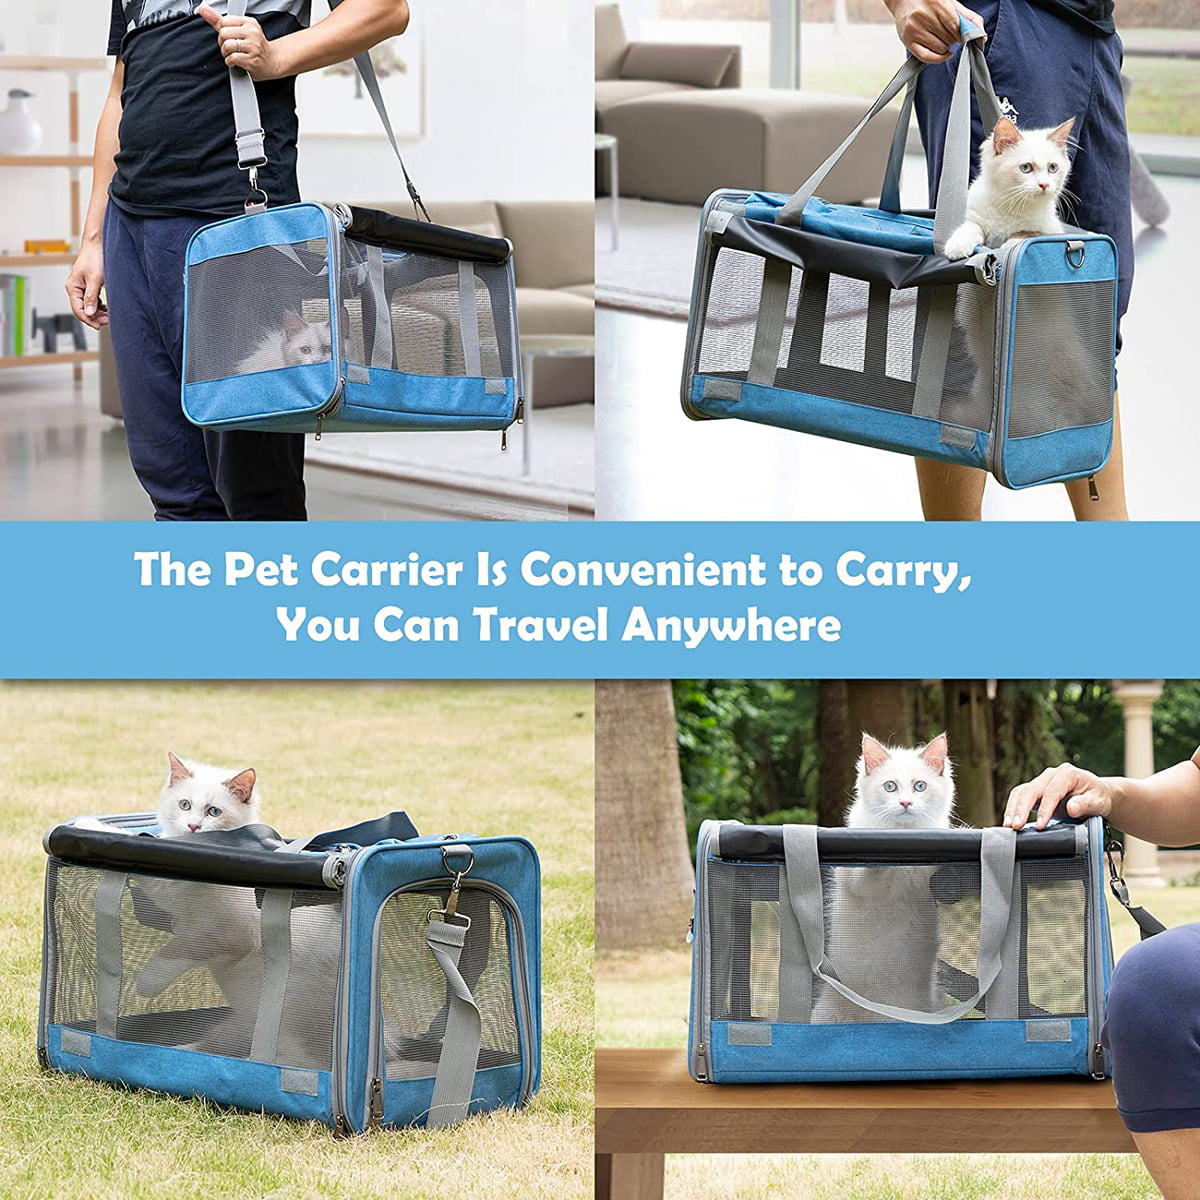 Pnimaund Cat Carrier Large Pet Carrier Soft Dog Carrier with Lockable  Zippers [2023New] Cat Carriers for Medium Large Cats Under 25 Lbs  Collapsible